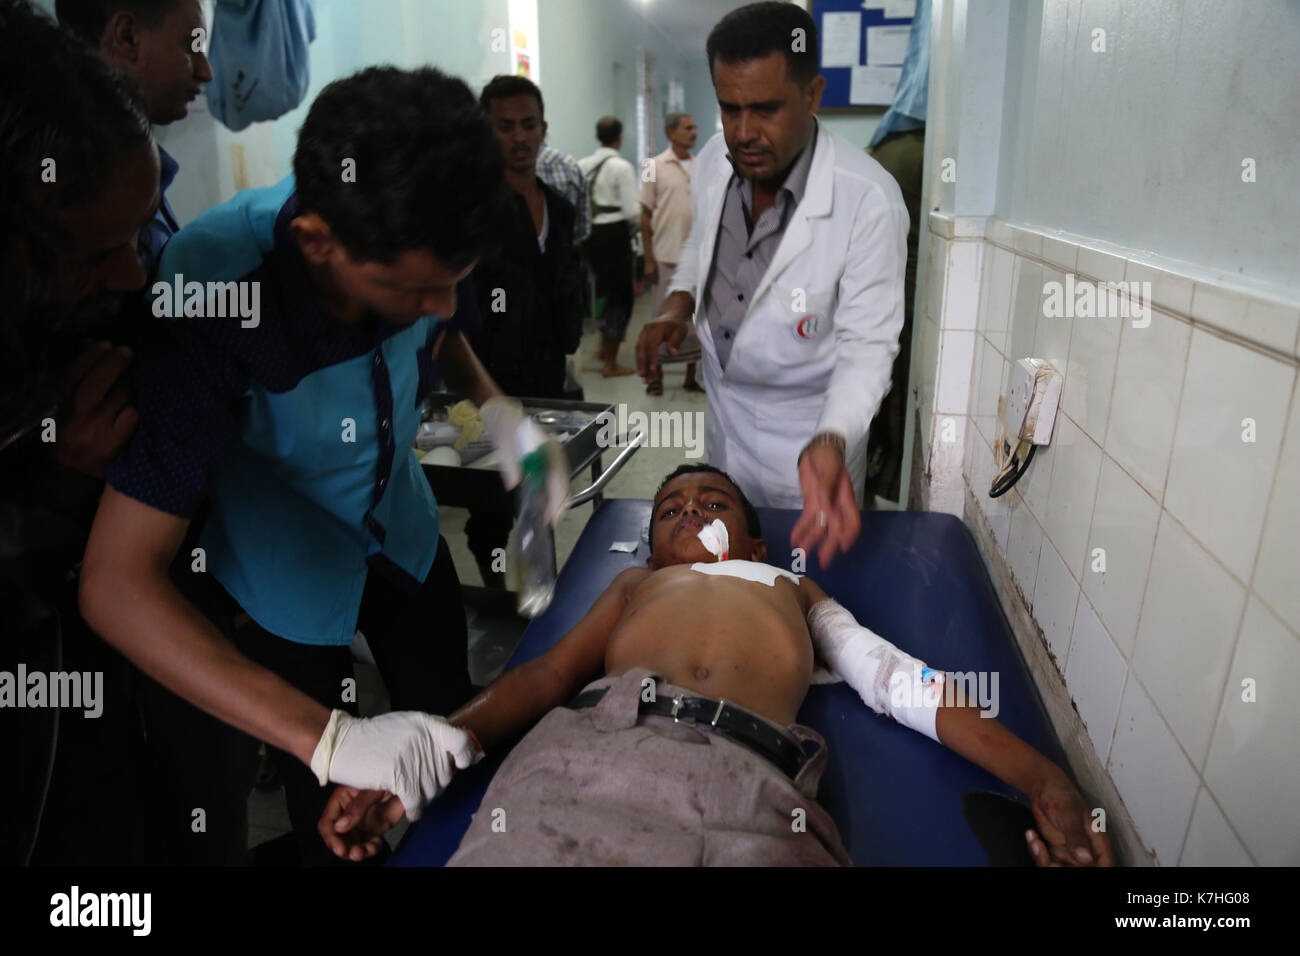 Civilians are treated in the Revolution hospital in the centre of Taiz for various injuries, following artillery shelling in residential neighbourhoods of the Yemeni city. 15th Sep, 2017. The bombardment was carried out by the Ansar Allah movement (Houthi) and their allied forces loyal to former Yemeni president Ali Abdullah Salih. Three missiles targeted the neighbourhoods of Shab Dima, of the Al-Sameel market, and of Jiula Al-Haud, located in the west of Taiz, killing three children and injuring ten civilians Credit: Abdulnaser Alseddik/ImagesLive/ZUMA Wire/Alamy Live News Stock Photo